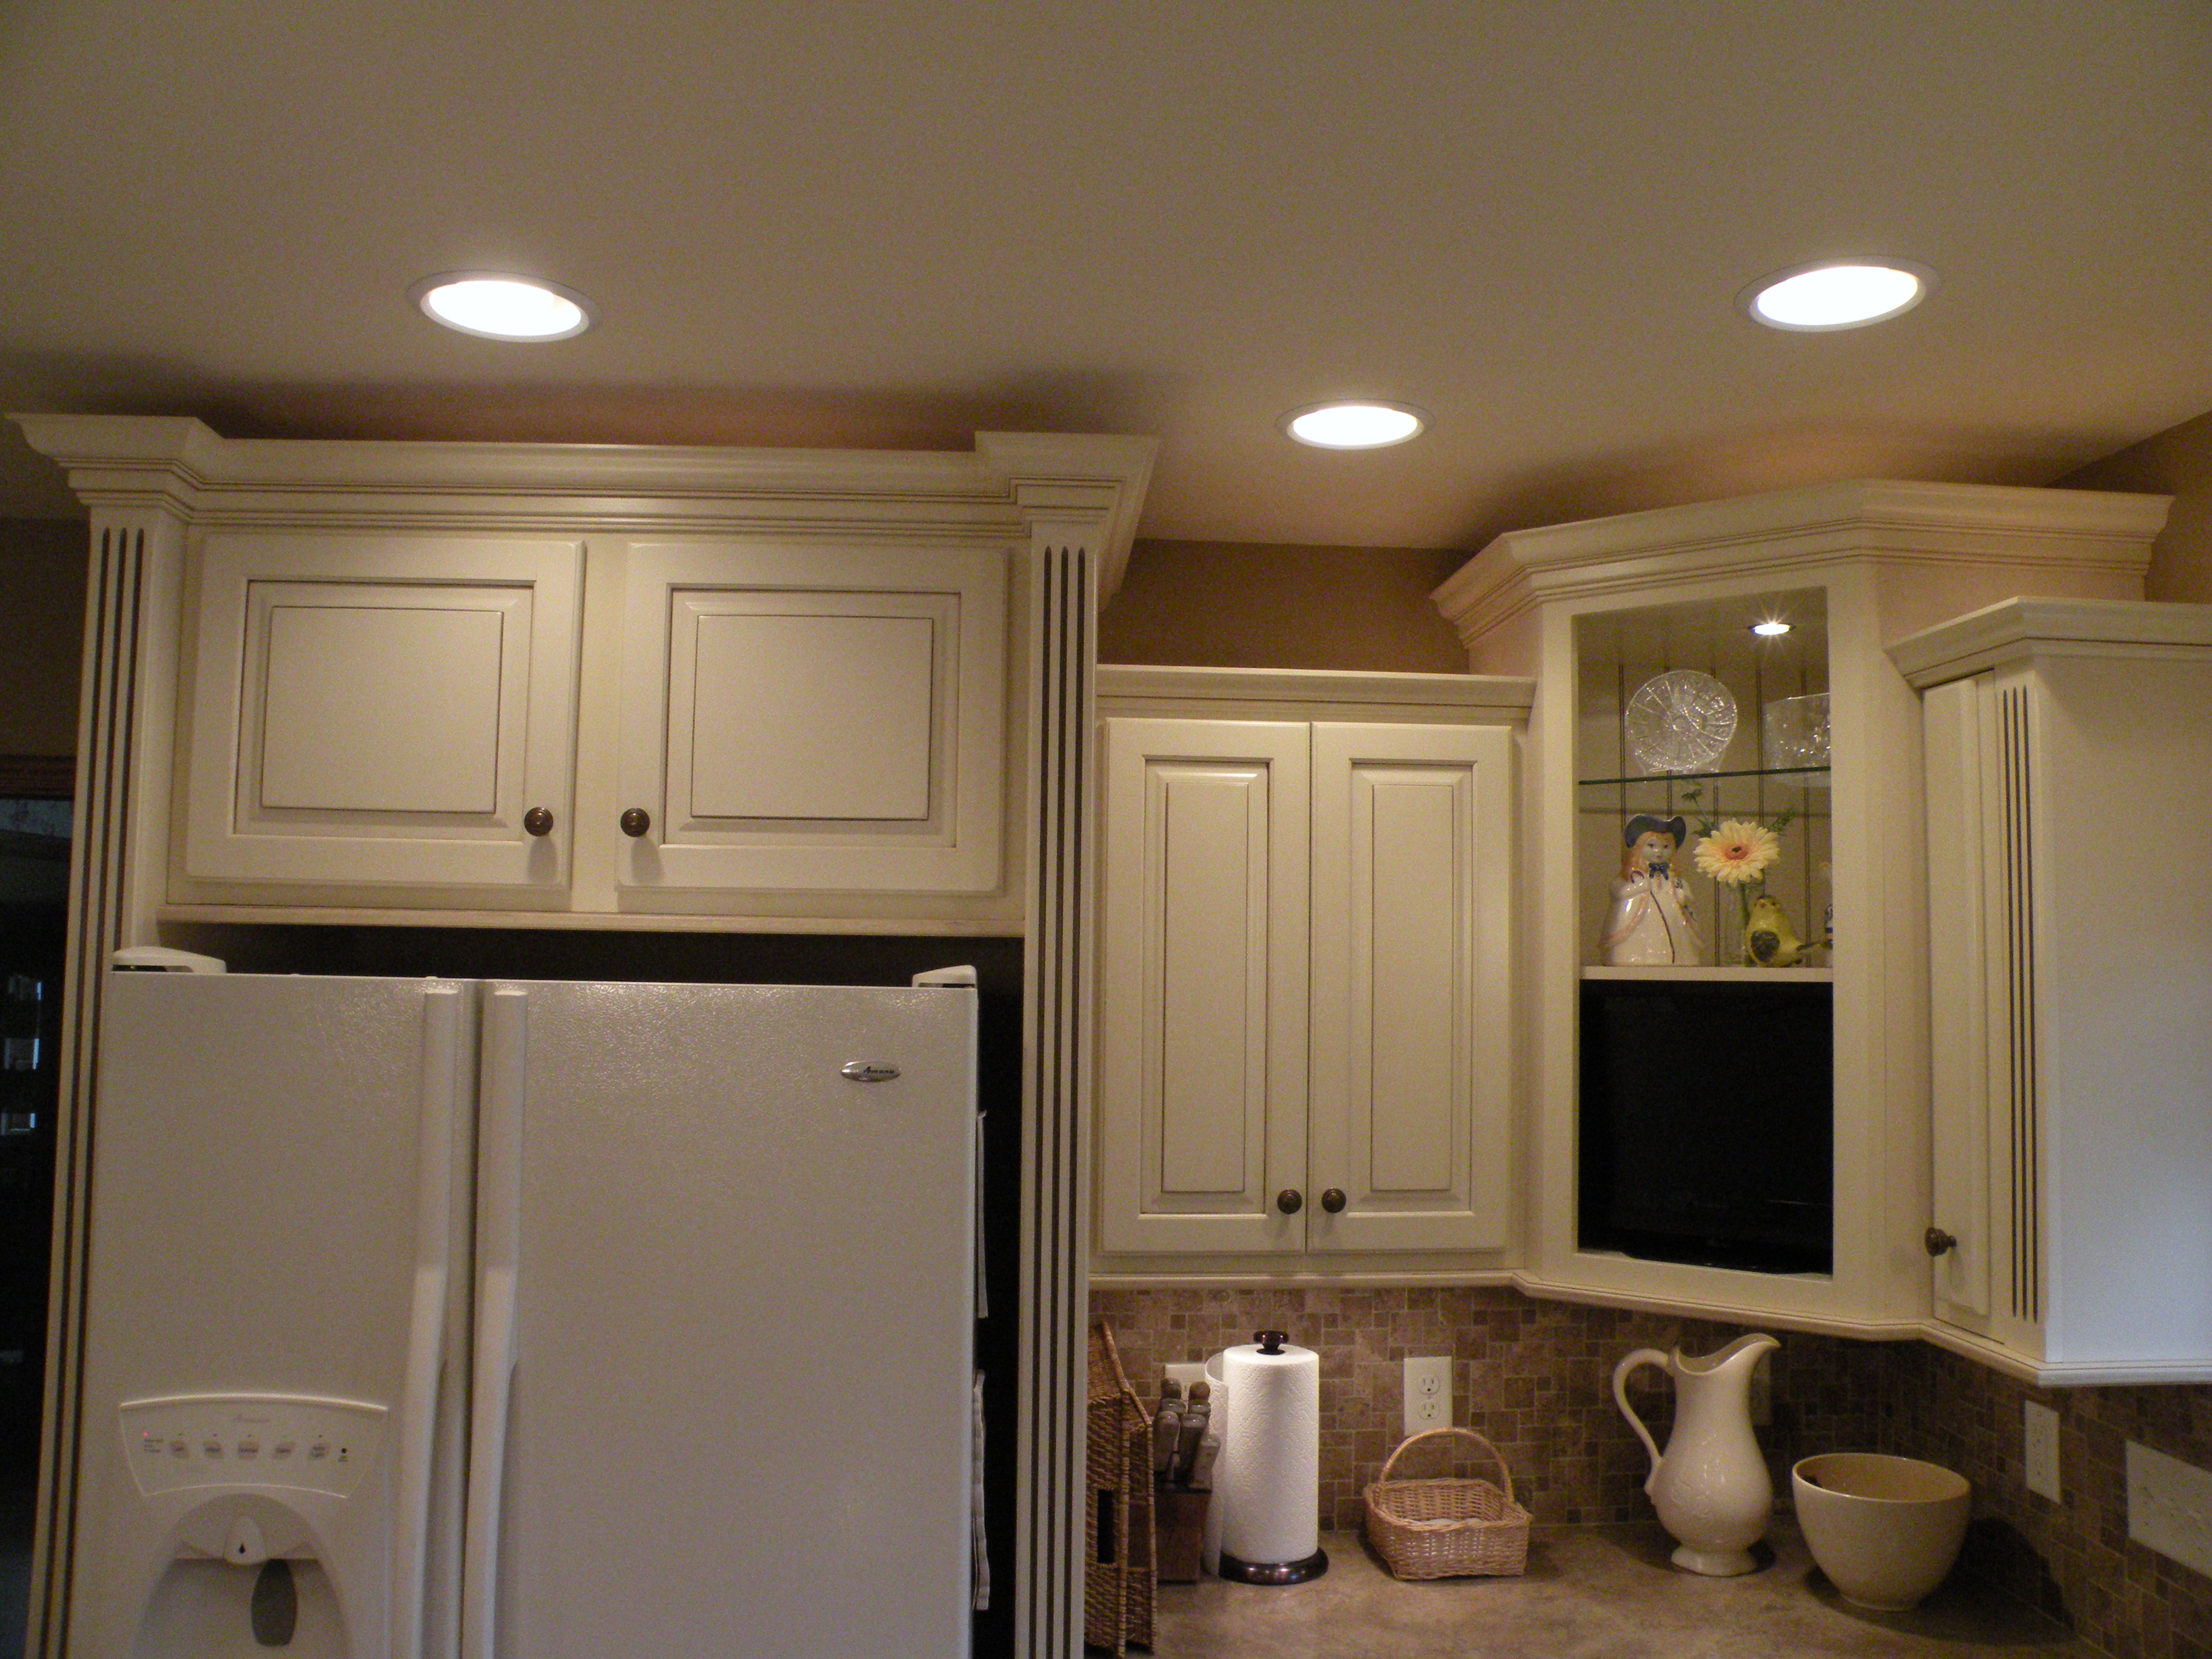 Biscotti Kitchen Cabinets With Light Granite Countertops With